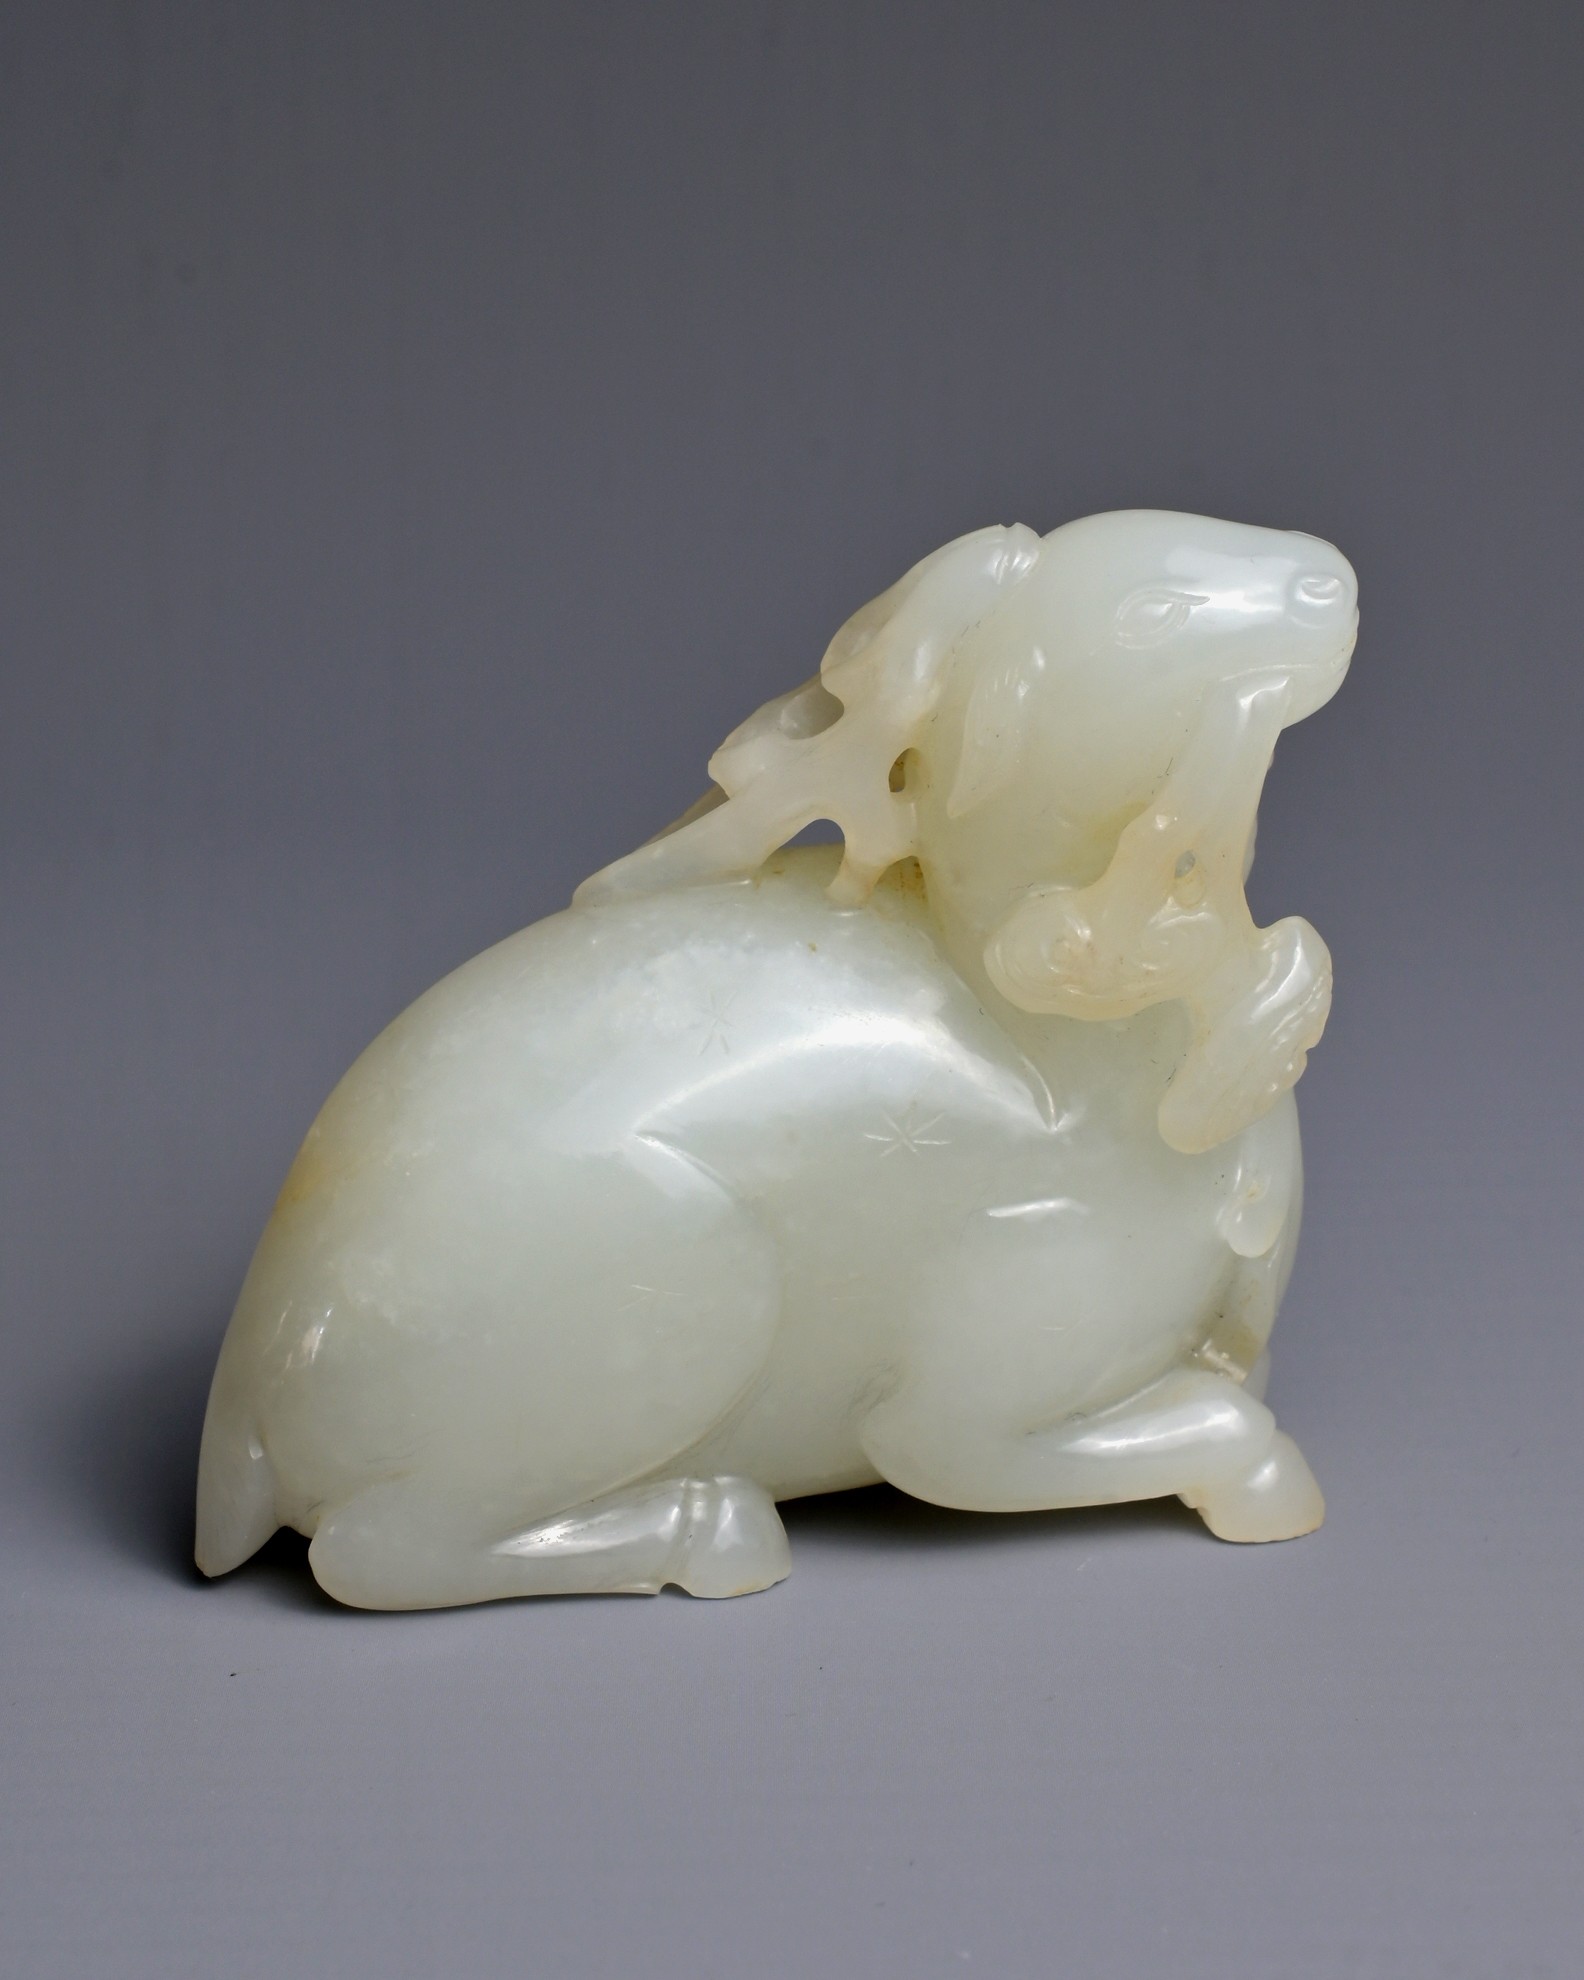 A CHINESE WHITE JADE CARVING OF A DEER, QING DYNASTY. Carved and pierced in the form of a